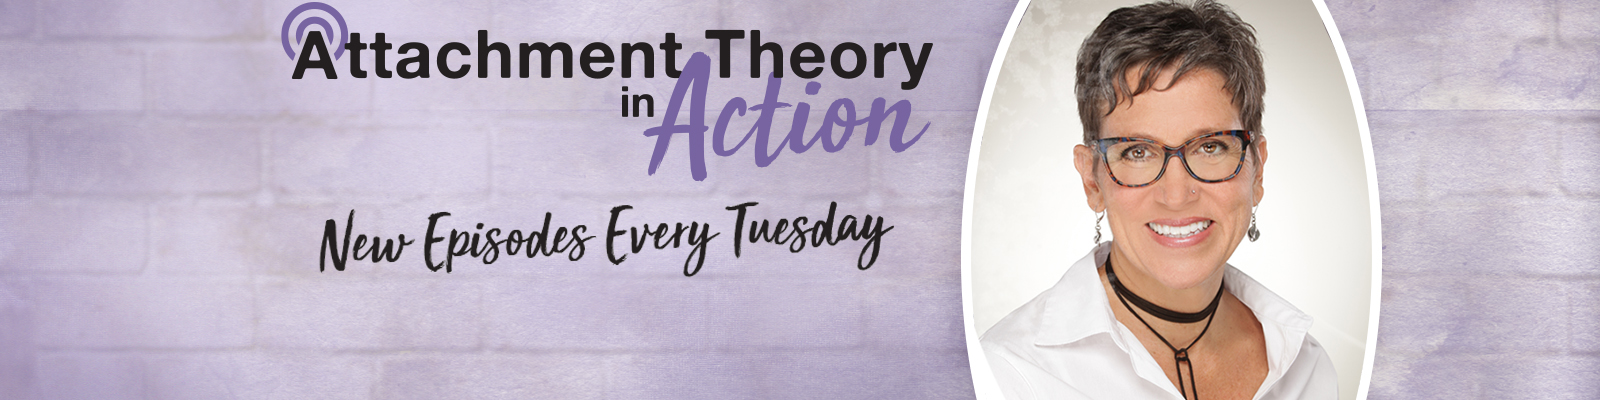 Attachment Theory in Action with Karen Doyle Buckwalter